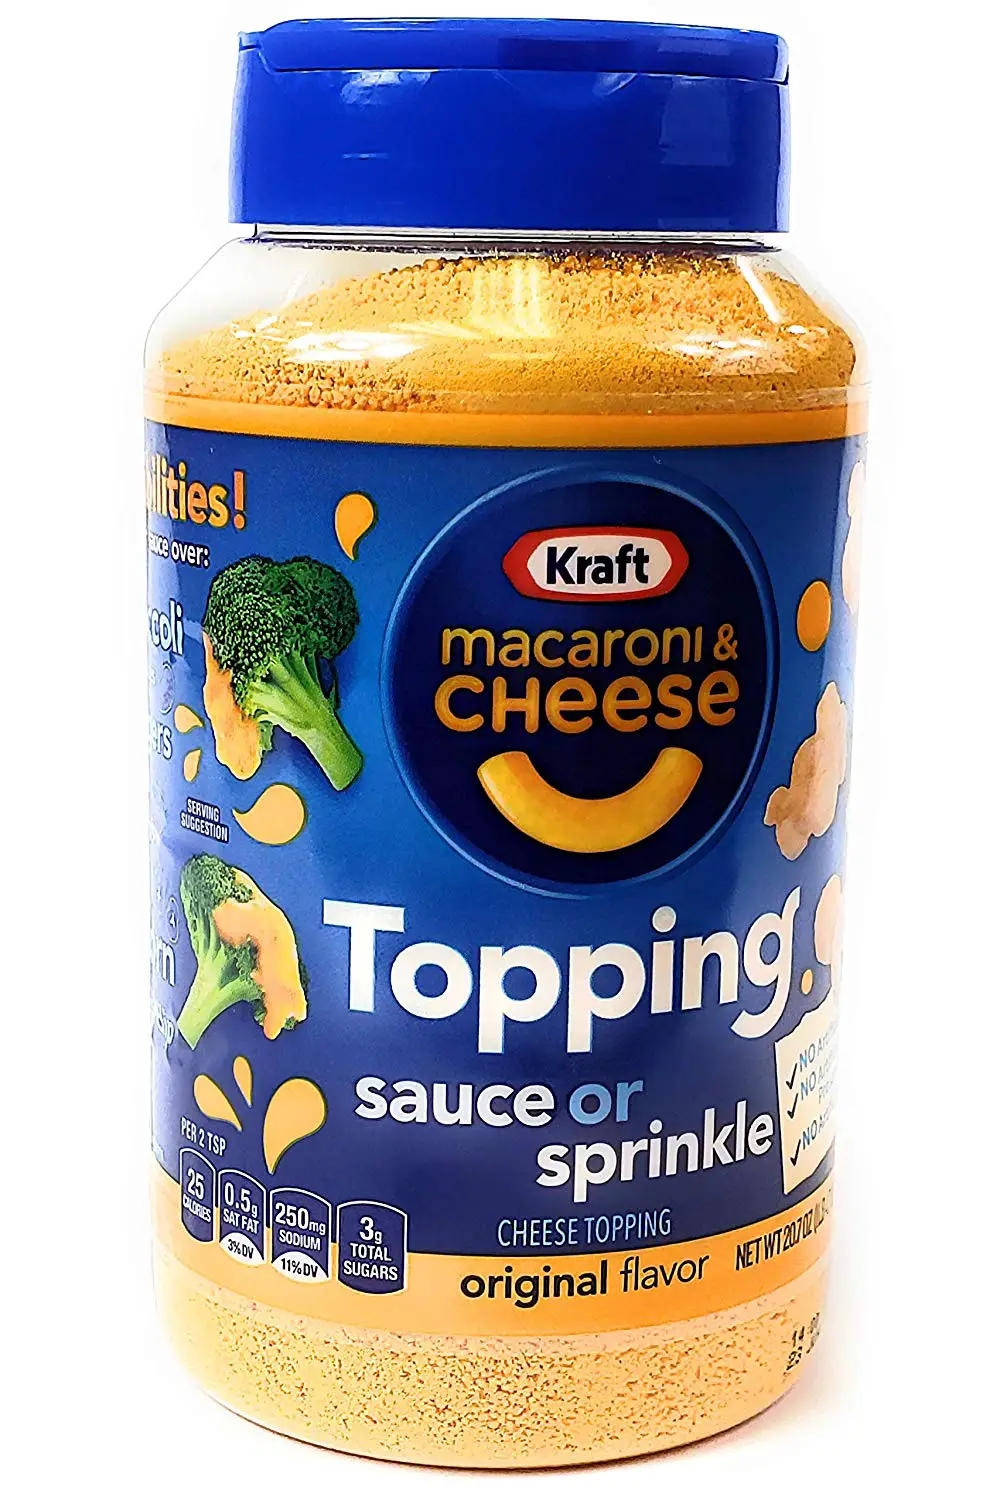 Kraft Is Now Selling Mac and Cheese Topping in a Jar ...